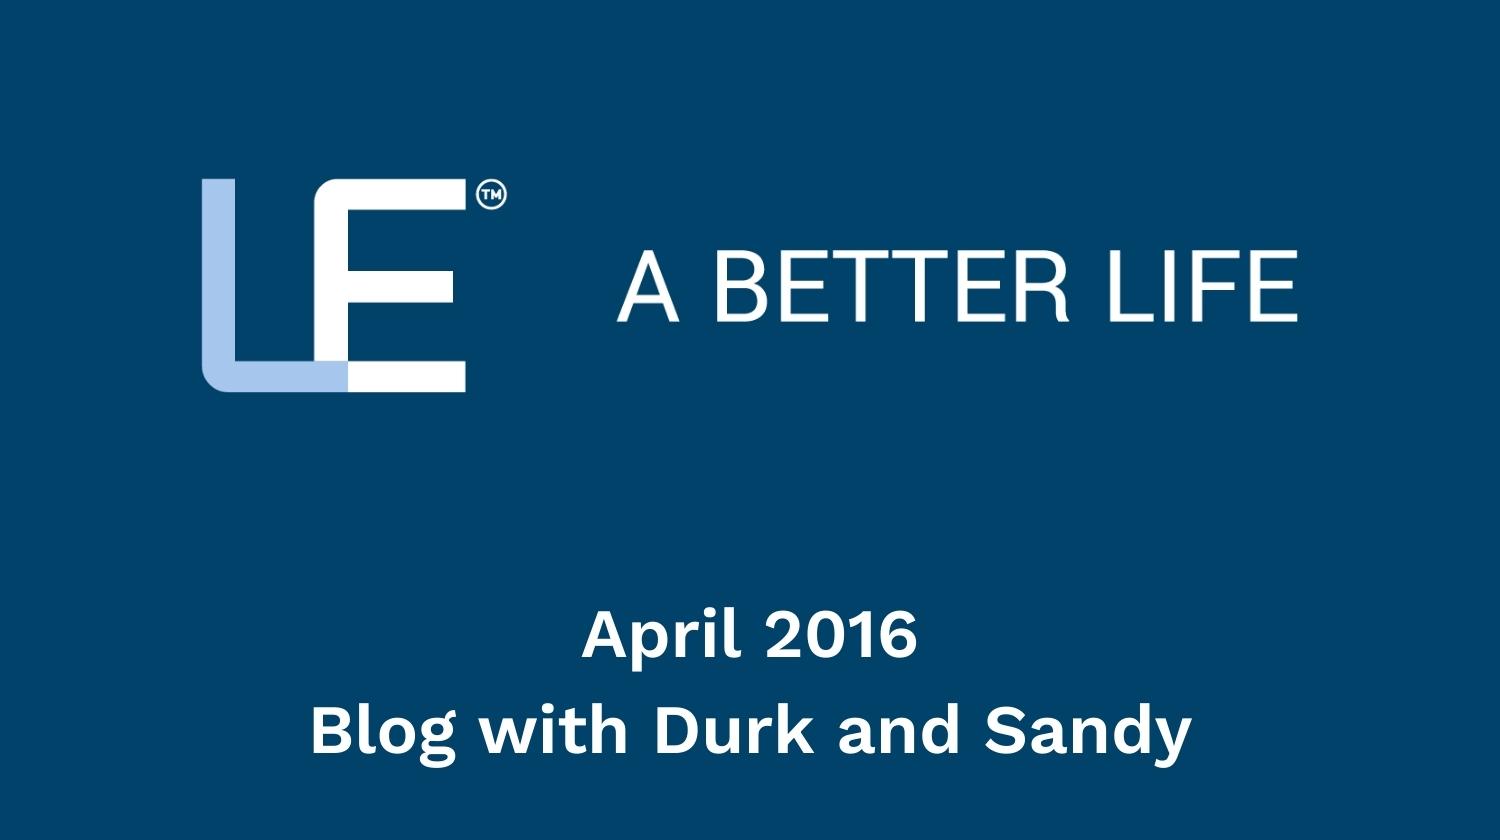 April 2016 Blog with Durk and Sandy